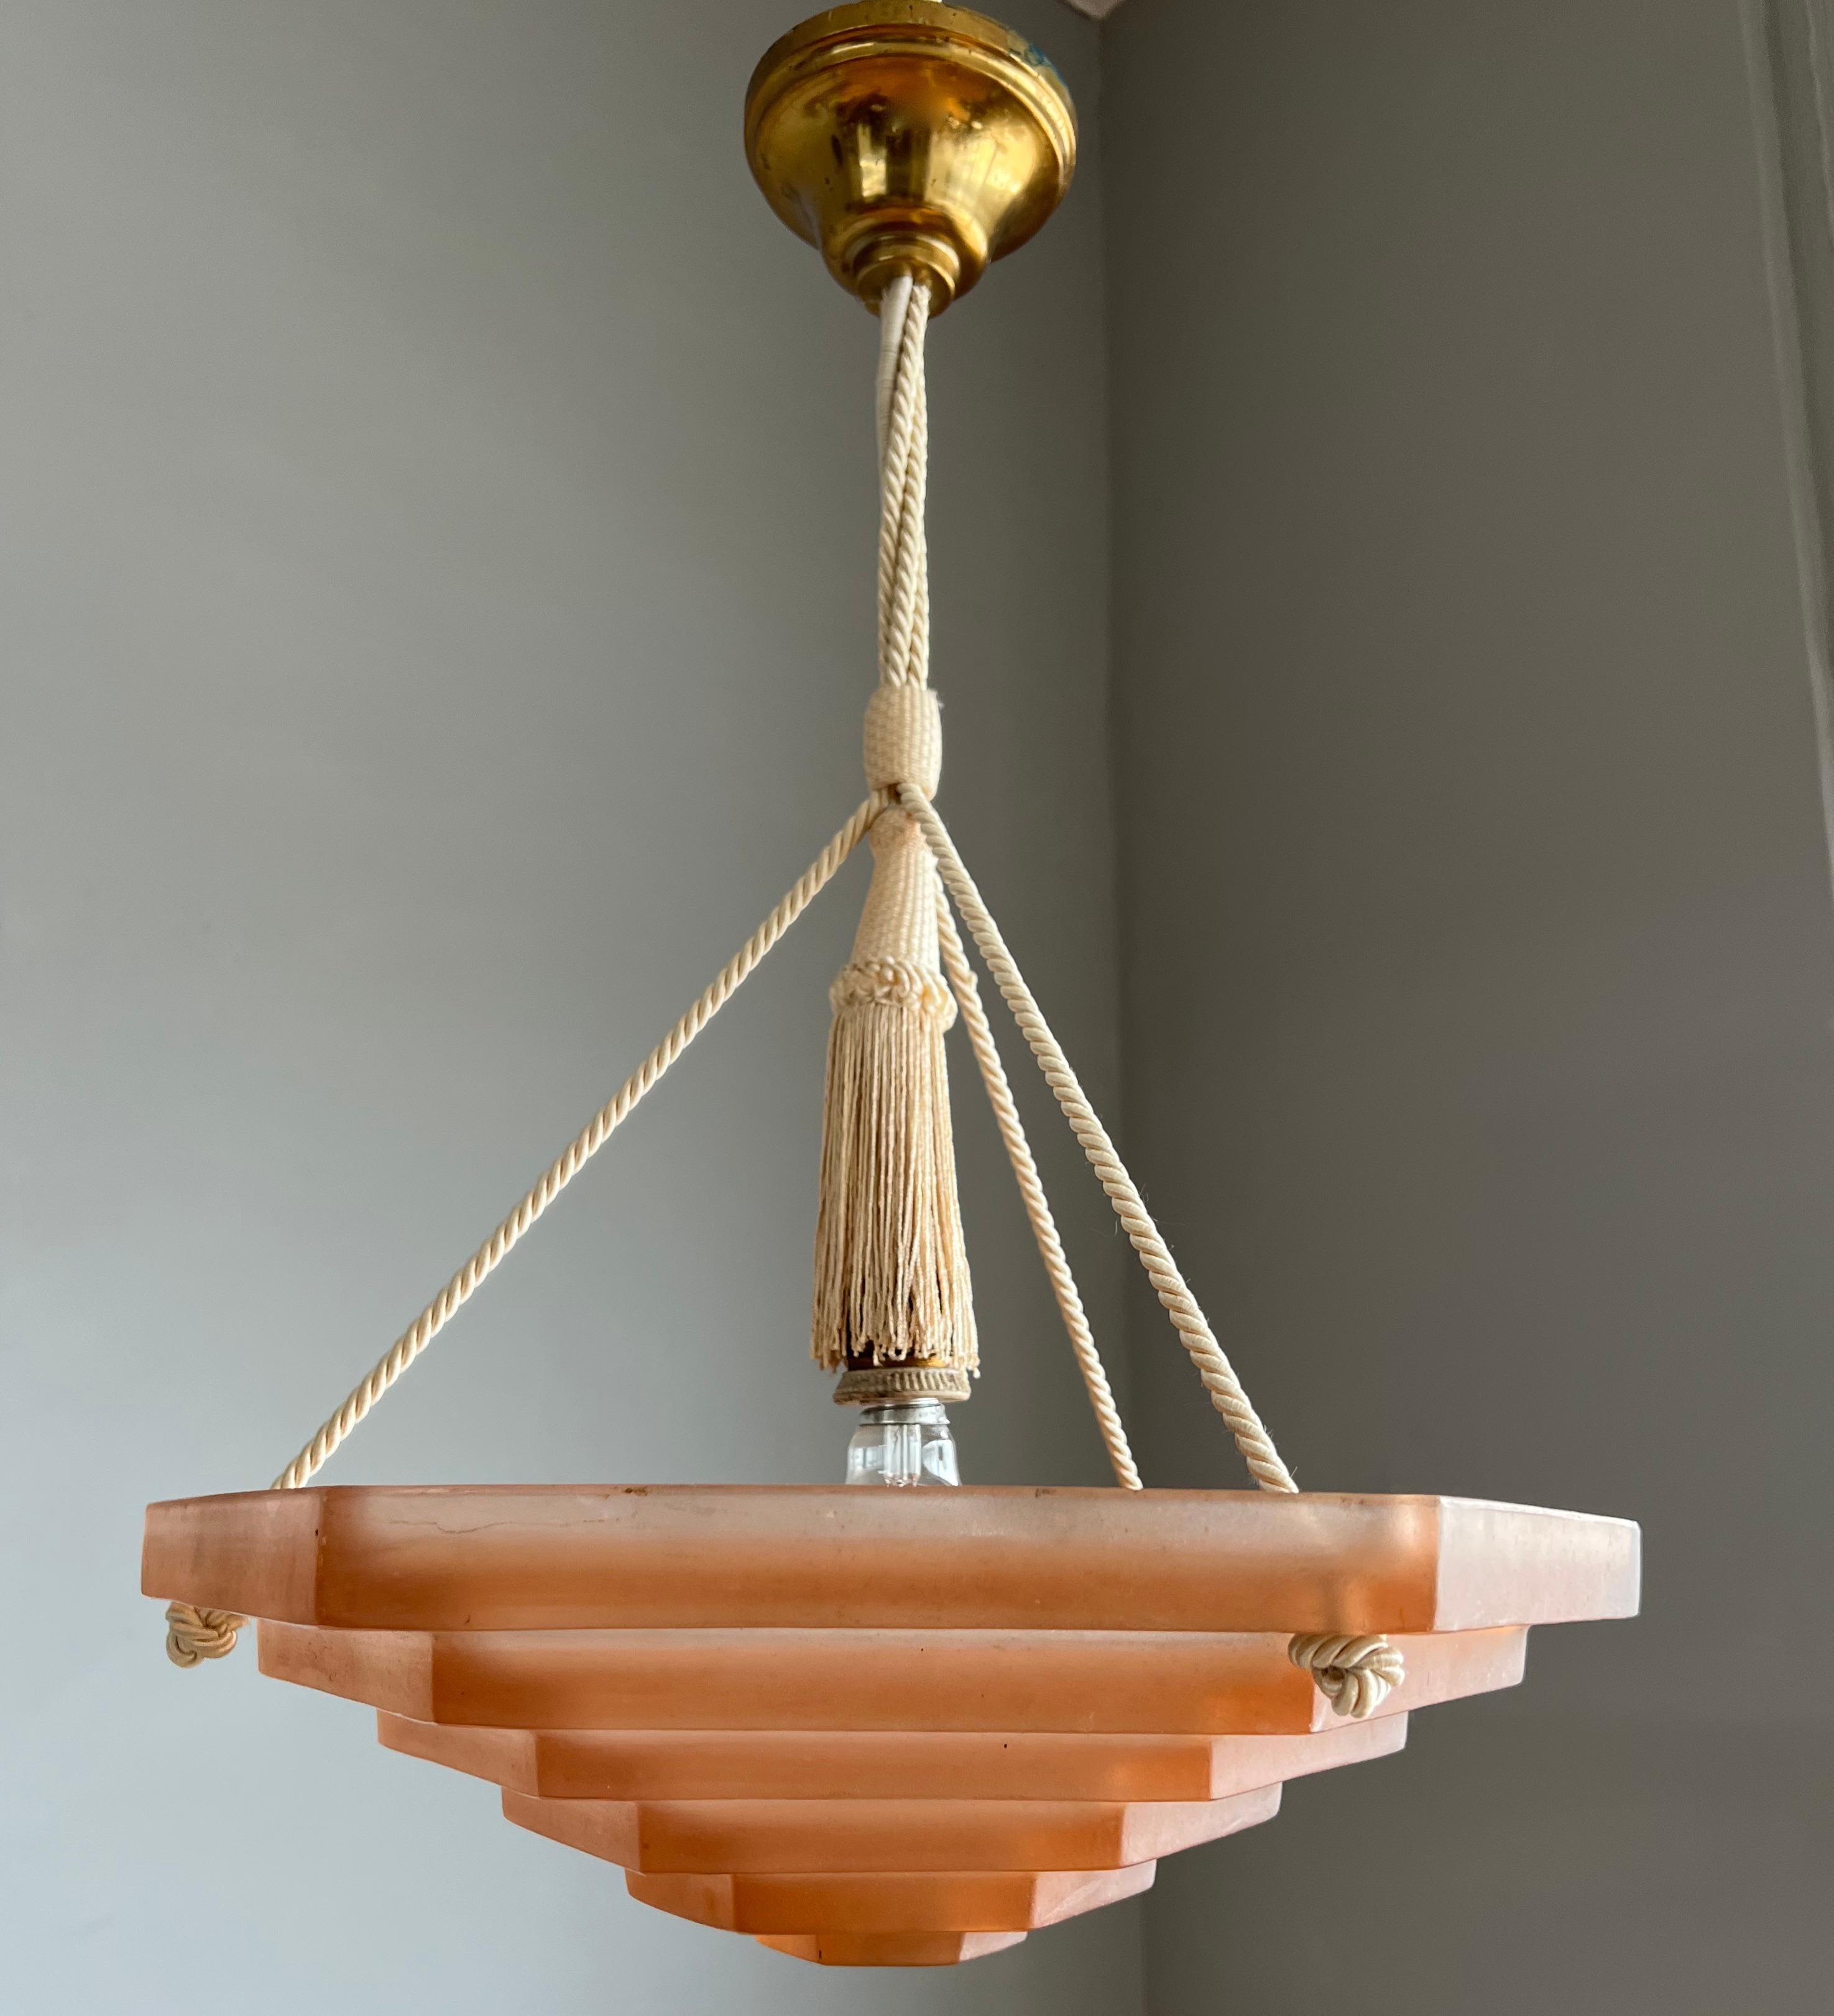 Another top quality, antique French pendant light with the wow factor.

This unique, good size and stylish color Art Deco fixture from the heydays of the European Art Deco era will bring class, style and the most beautiful warm light in your